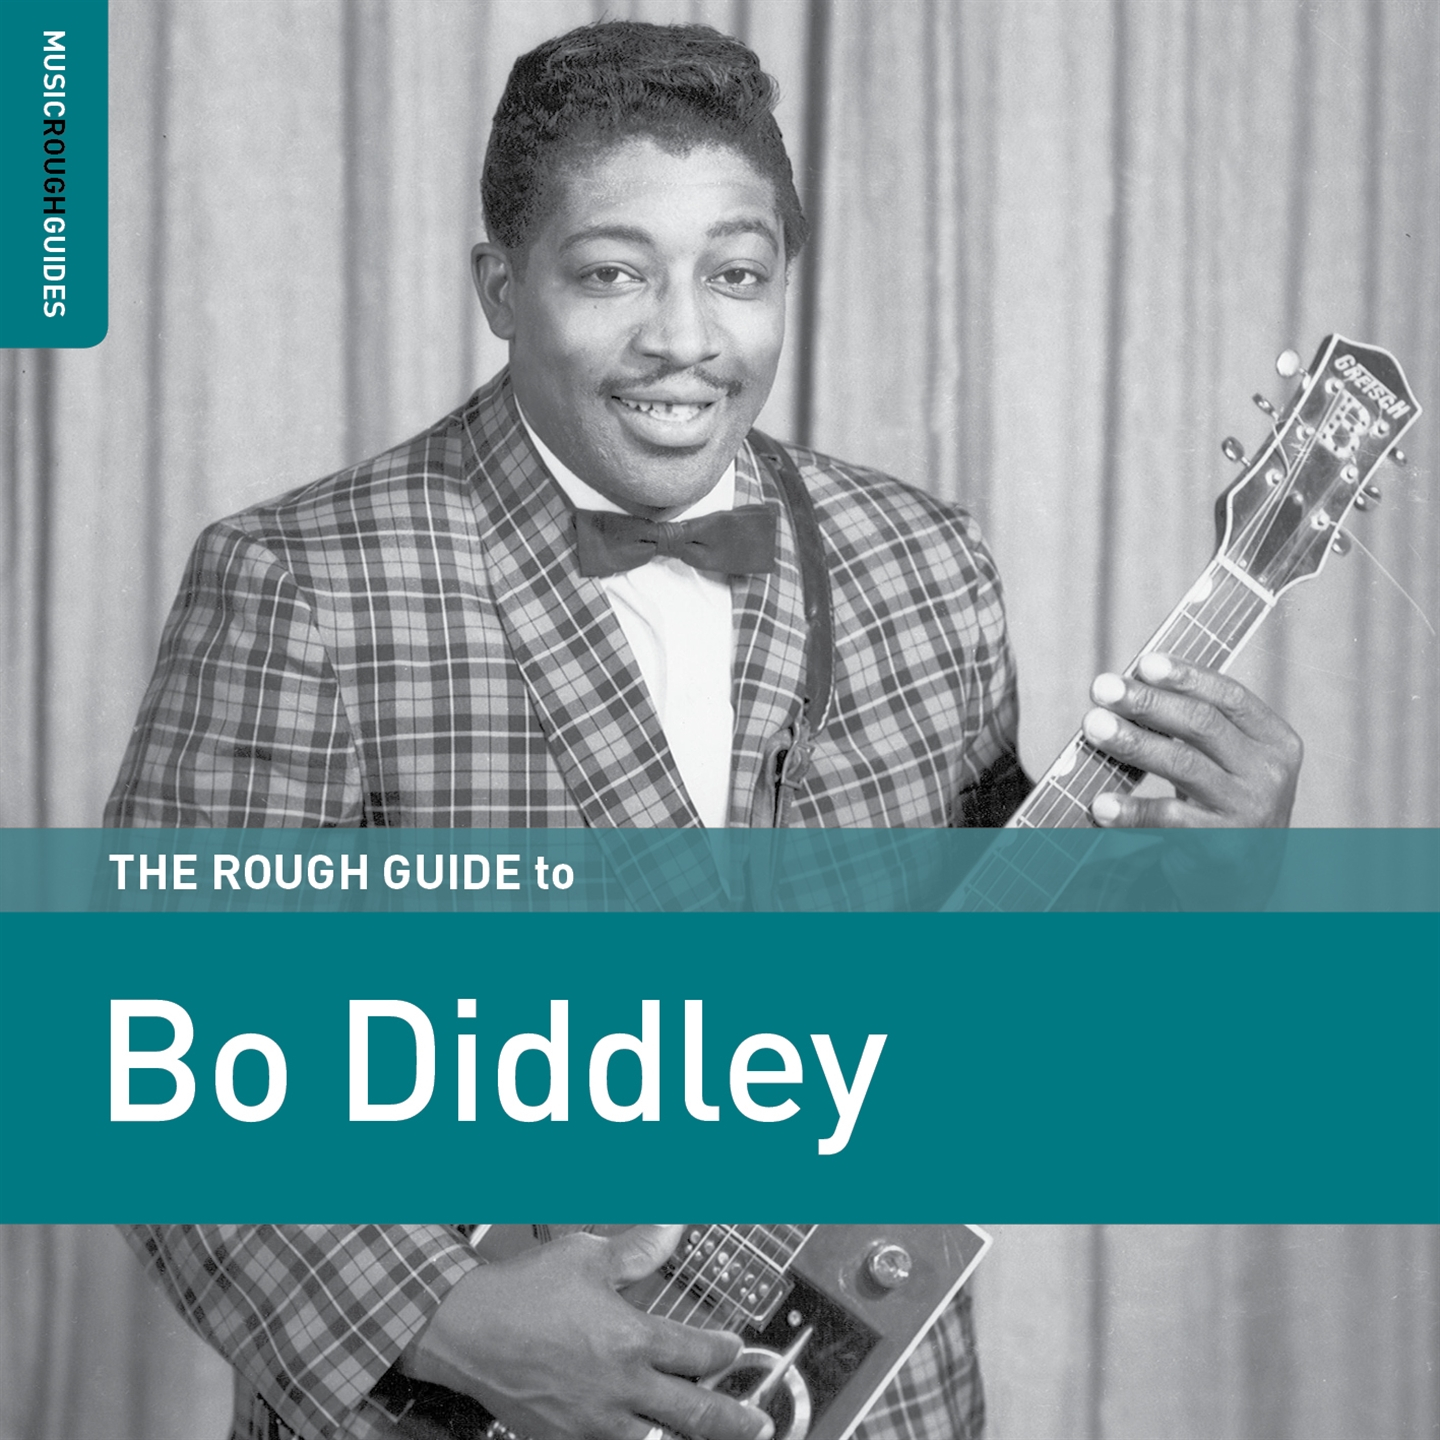 THE ROUGH GUIDE TO BO DIDDLEY